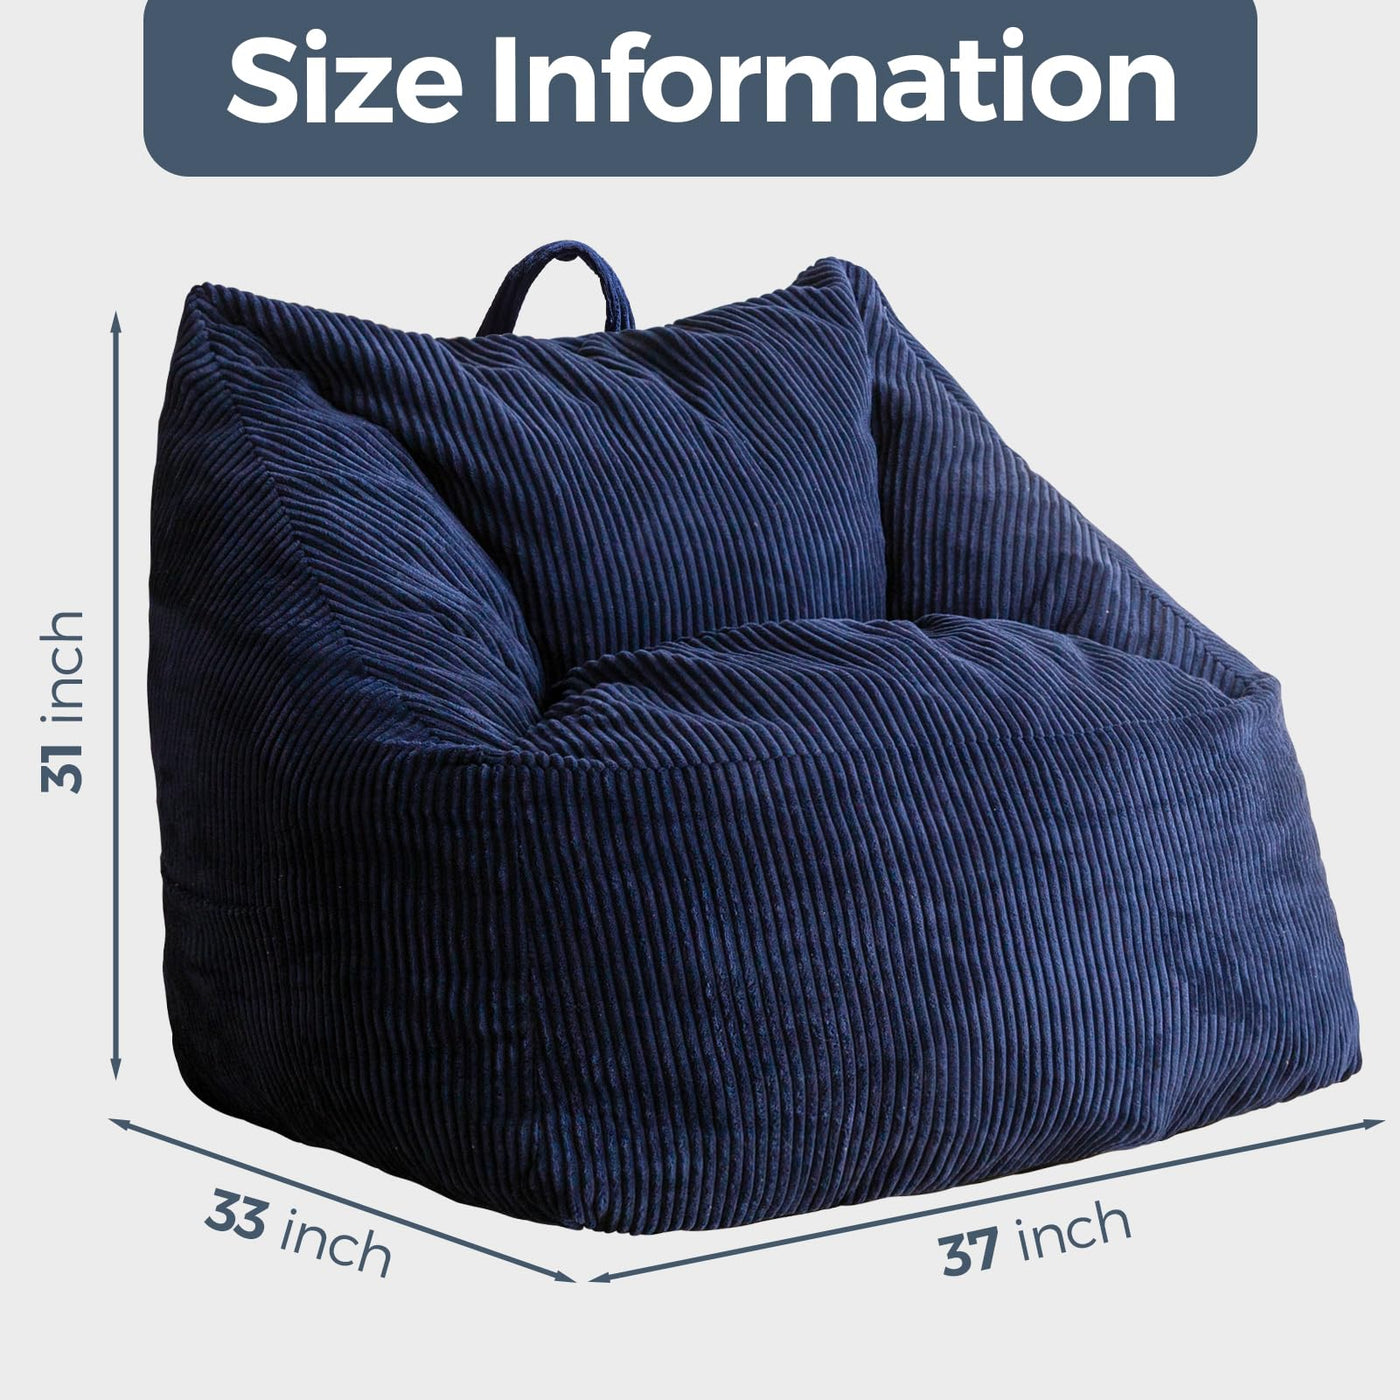 MAXYOYO Bean Bag Chair, Floor Sofa with Handle, Teens Living Room Accent Sofa Chair with Pocket for Gaming Reading Relaxing (Navy)